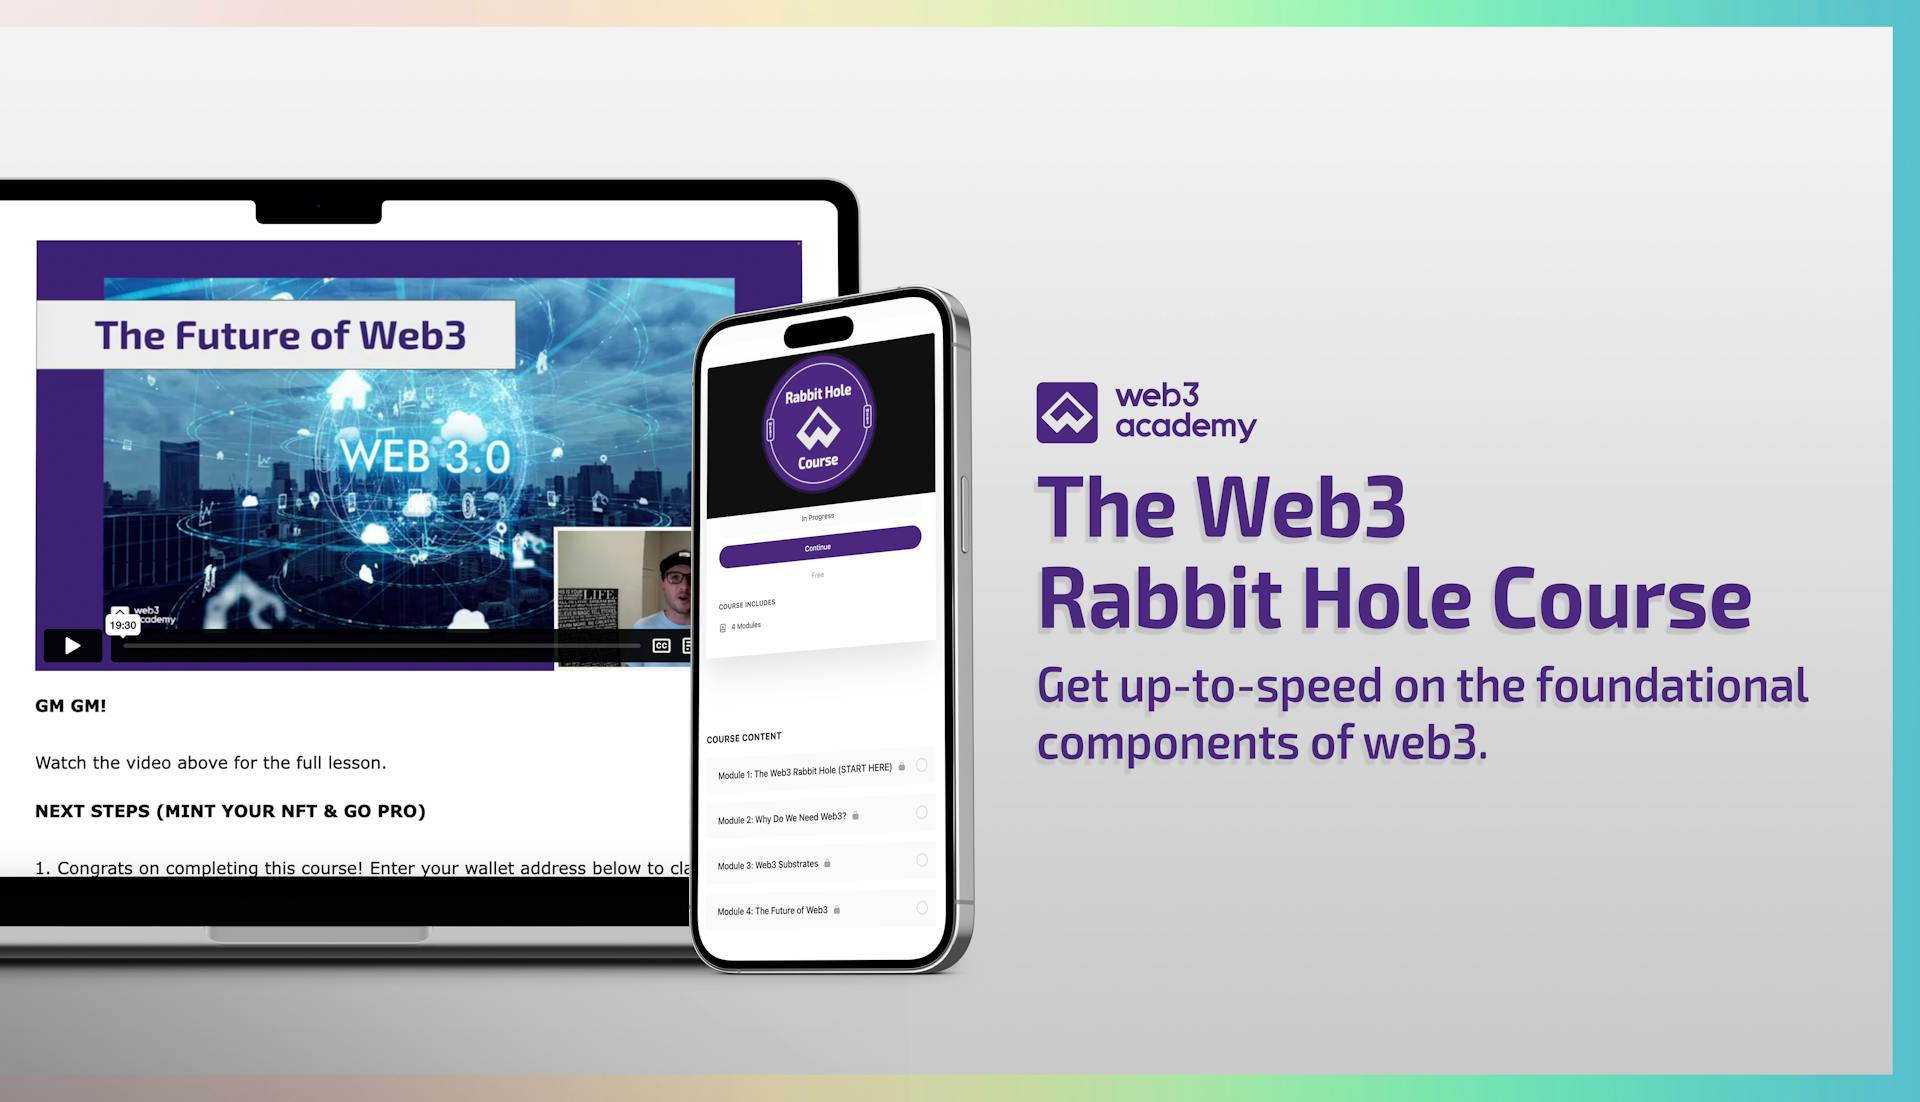 Web3 Academy - Everything You Need To Know About Their Rabbit Hole Course